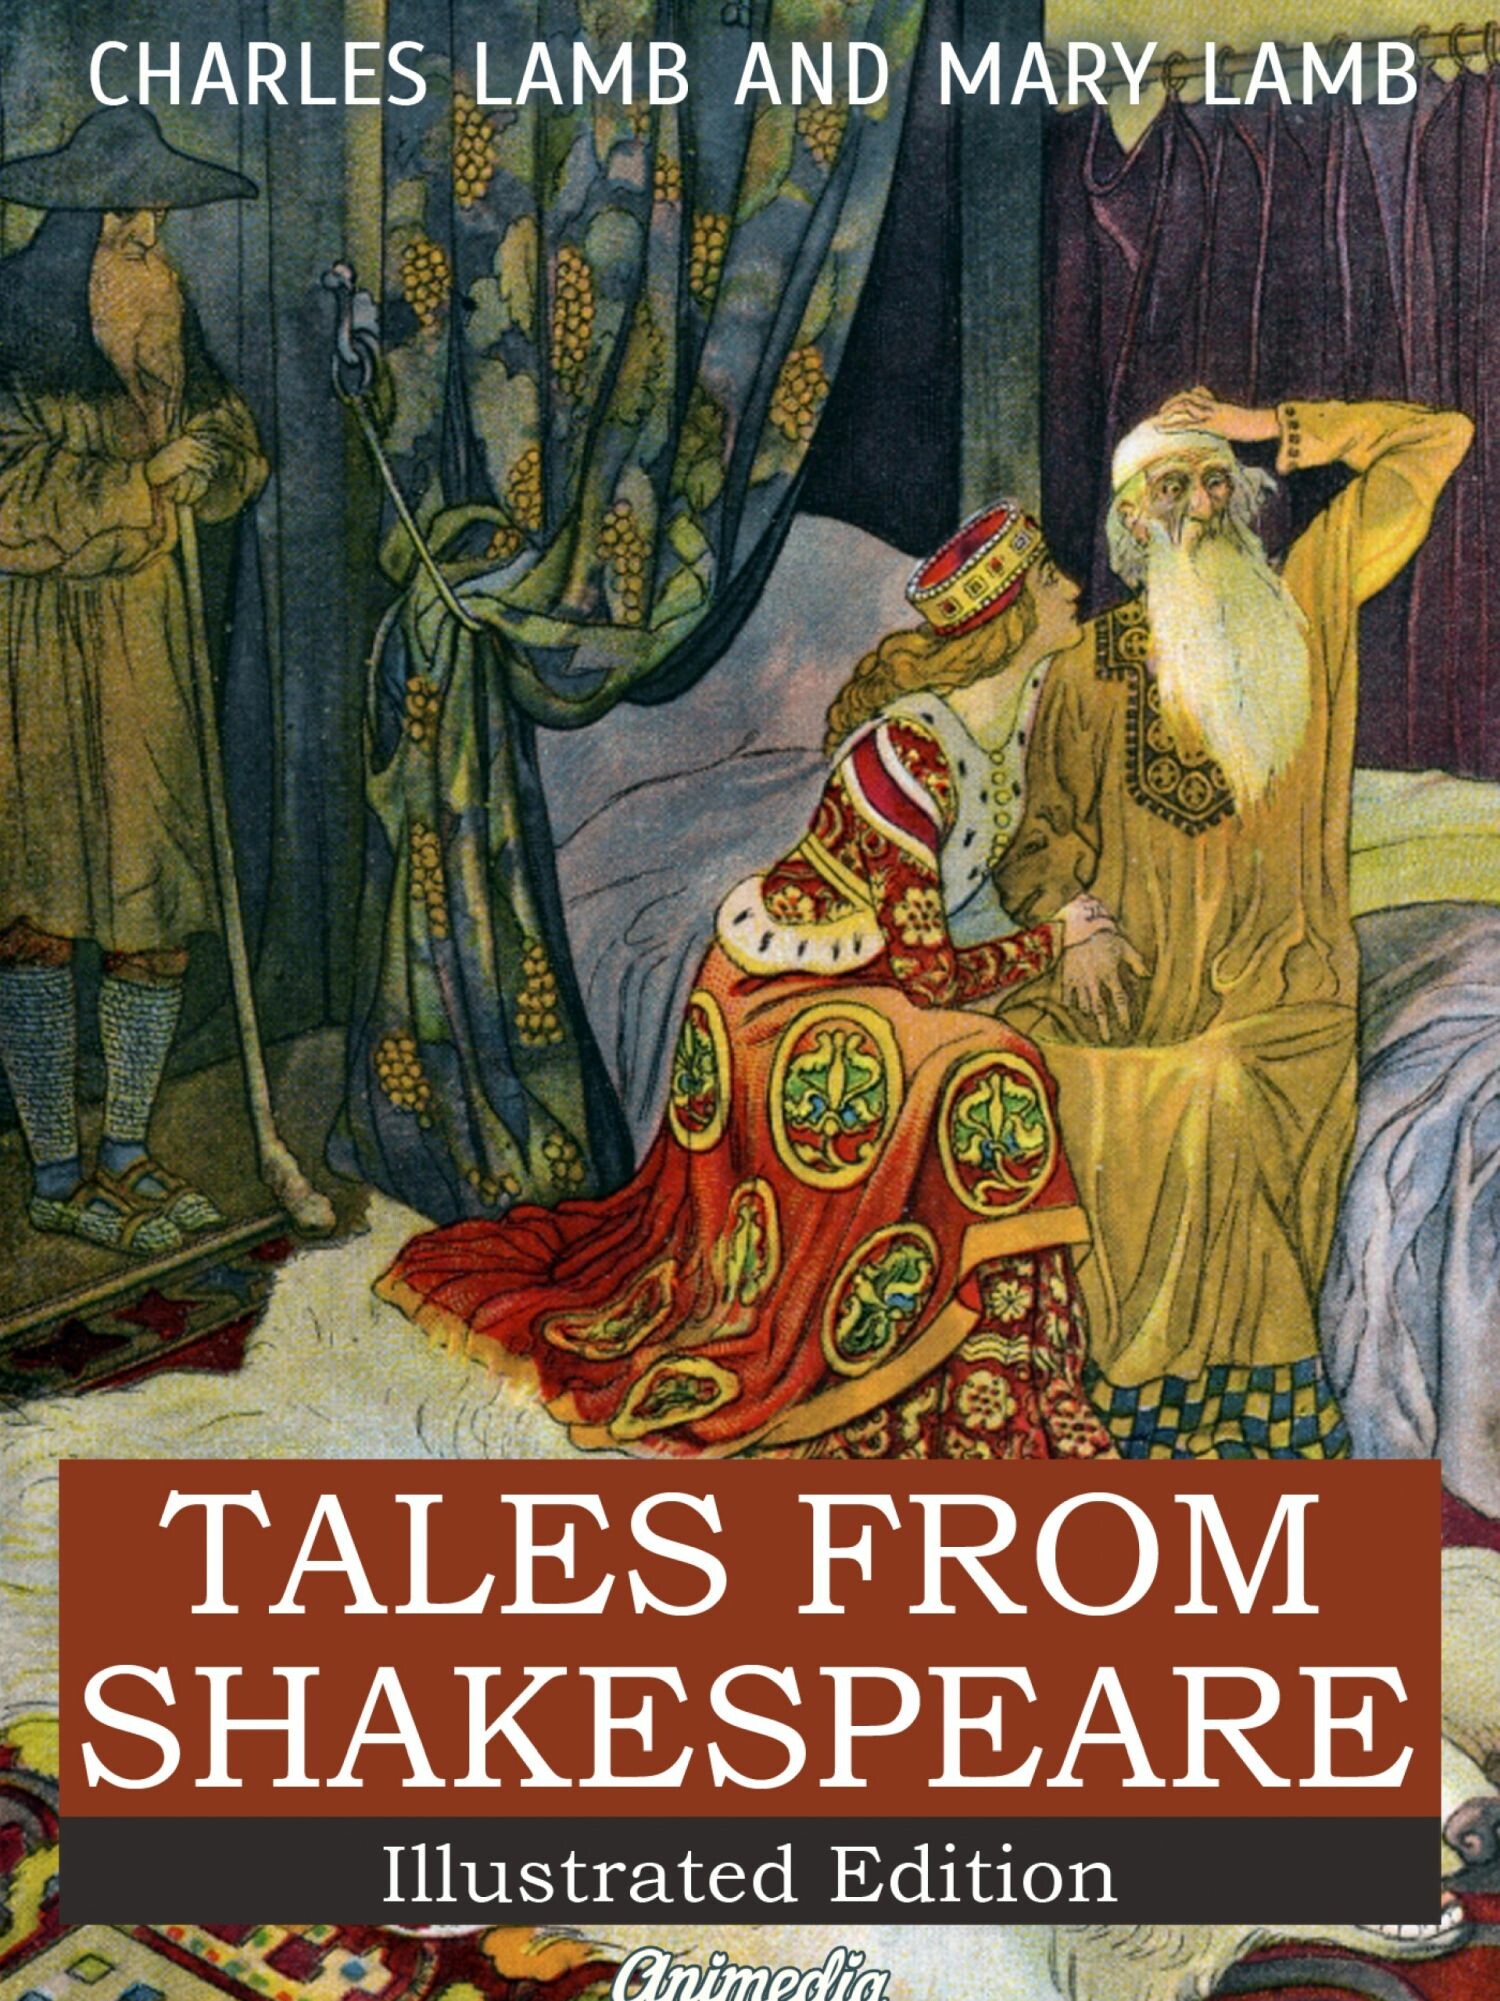 Tales from Shakespeare - A Midsummer Night's Dream, The Winter's Tale, King Lear, Macbeth, Romeo and Juliet, Hamlet, Prince of Denmark, Othello